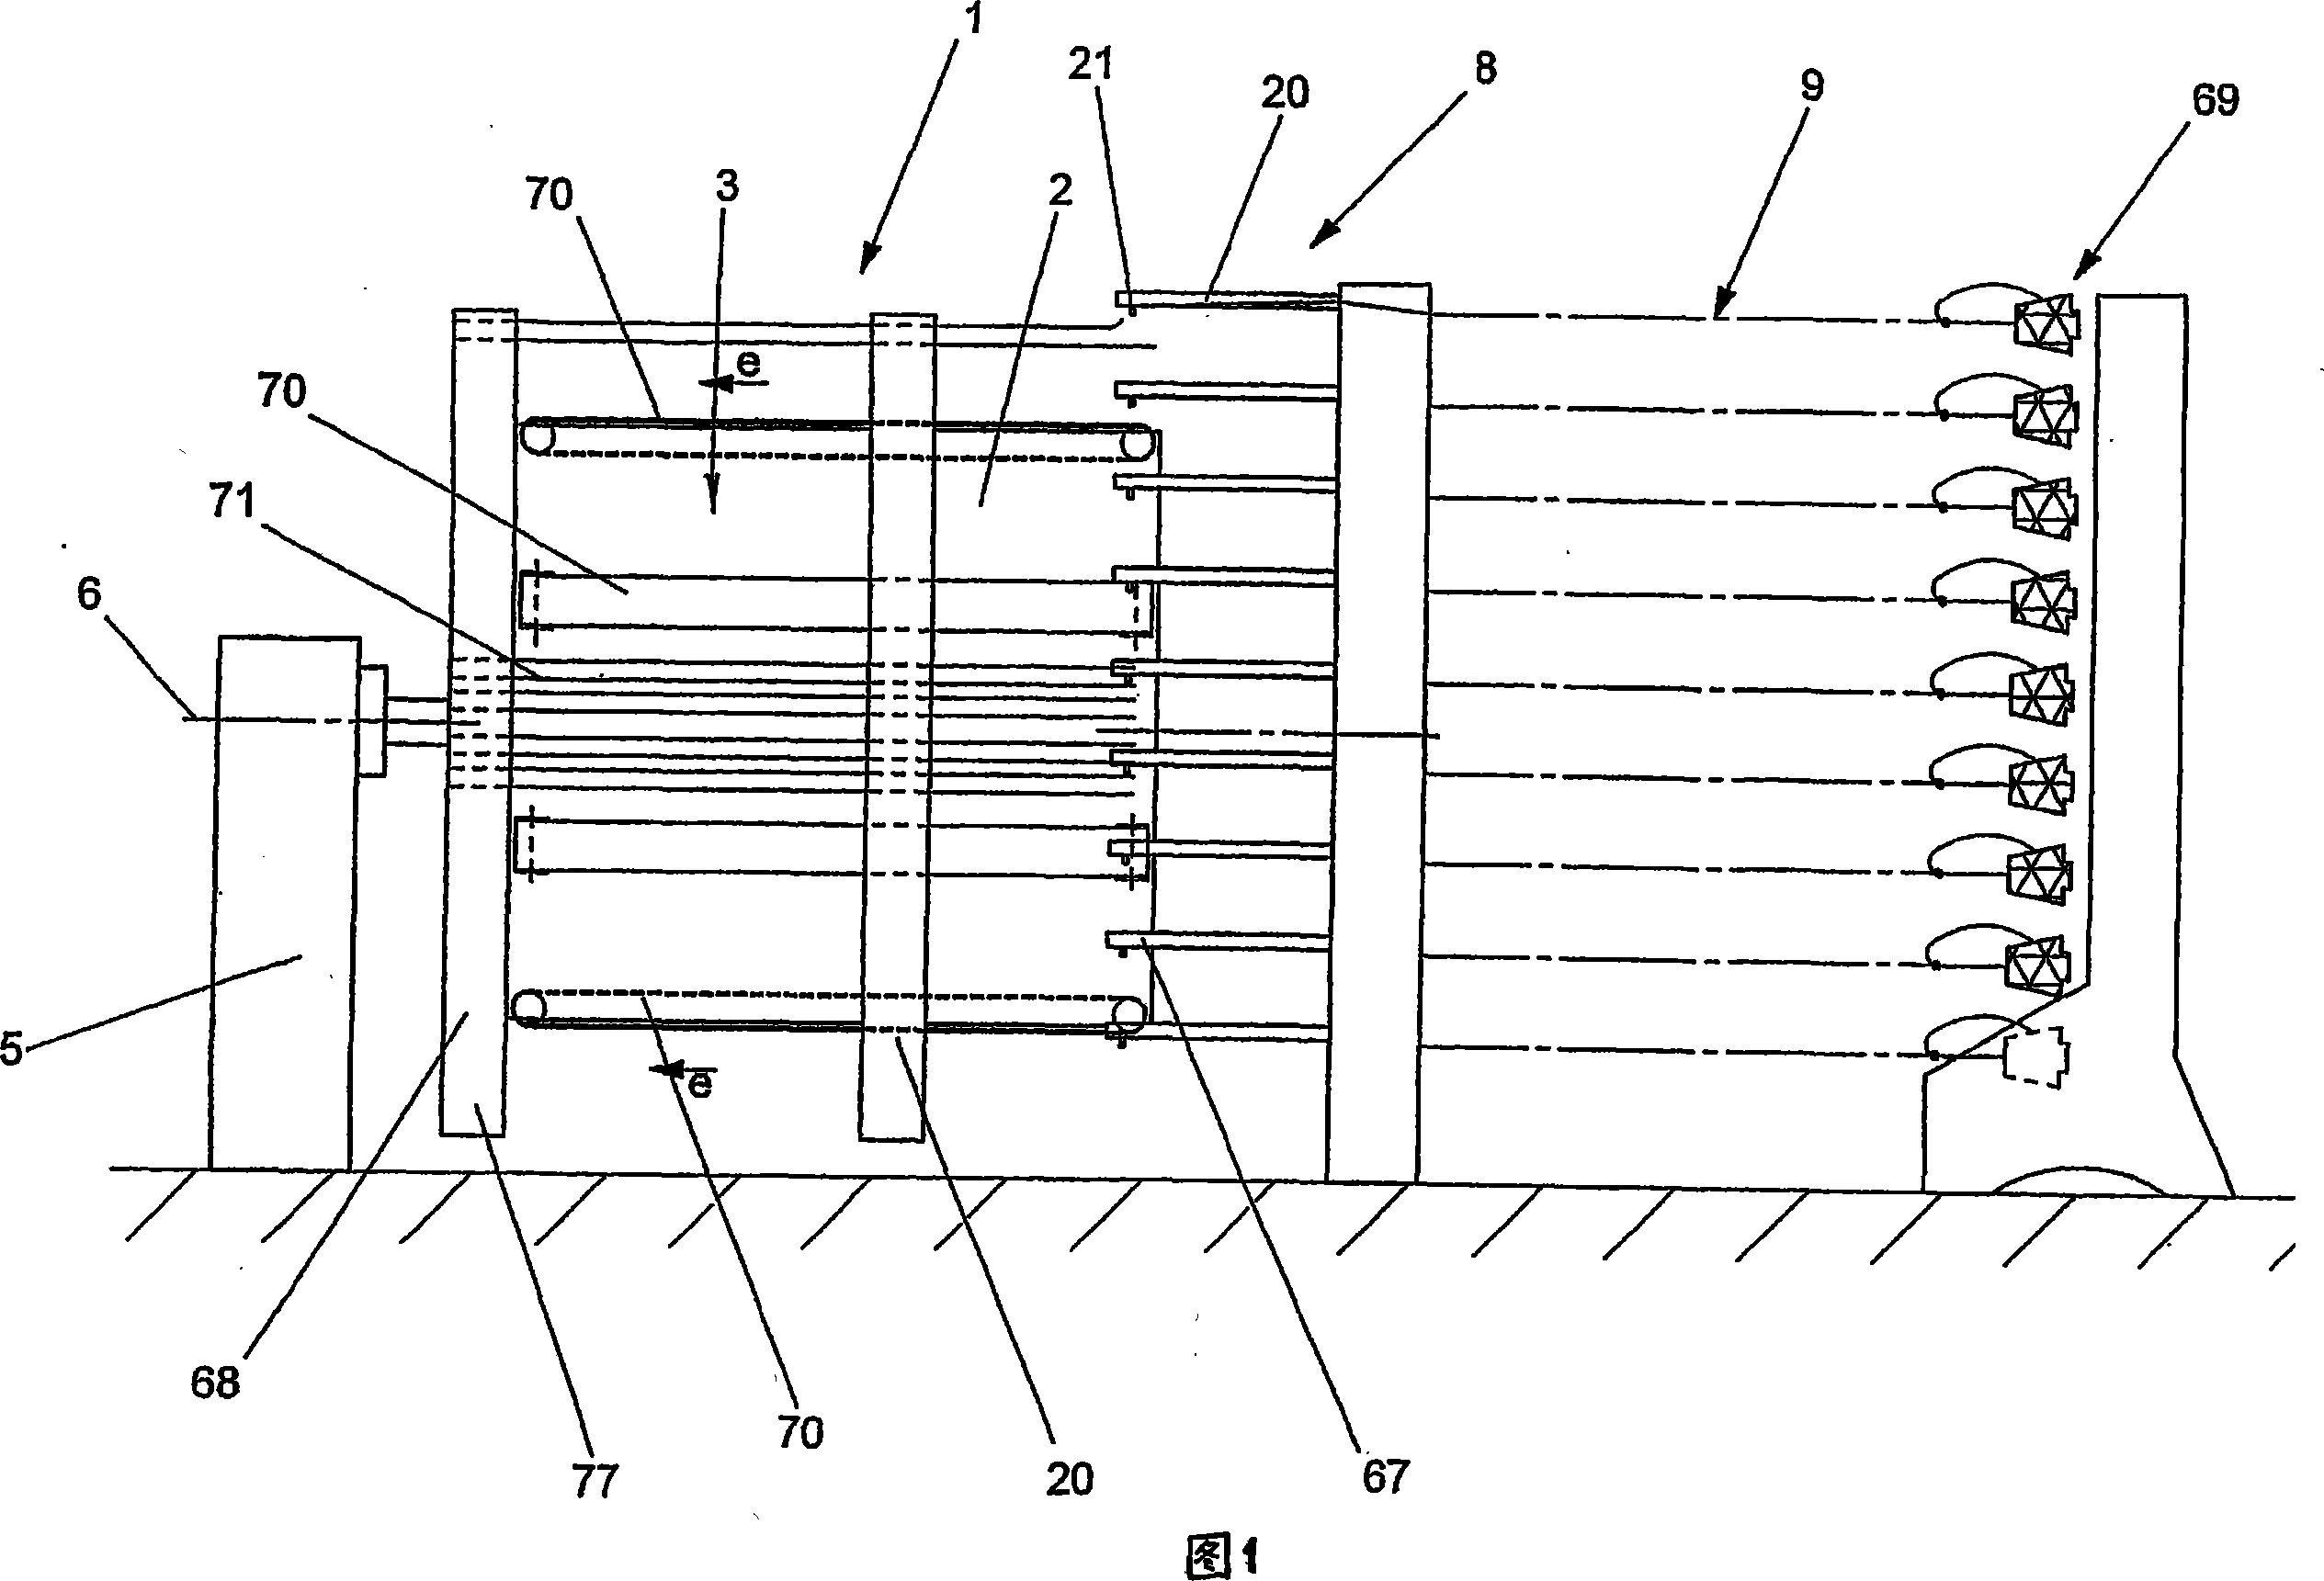 Method and device for winding a ribbon comprising a plurality of threads onto a winding body rotating about a rotation axis